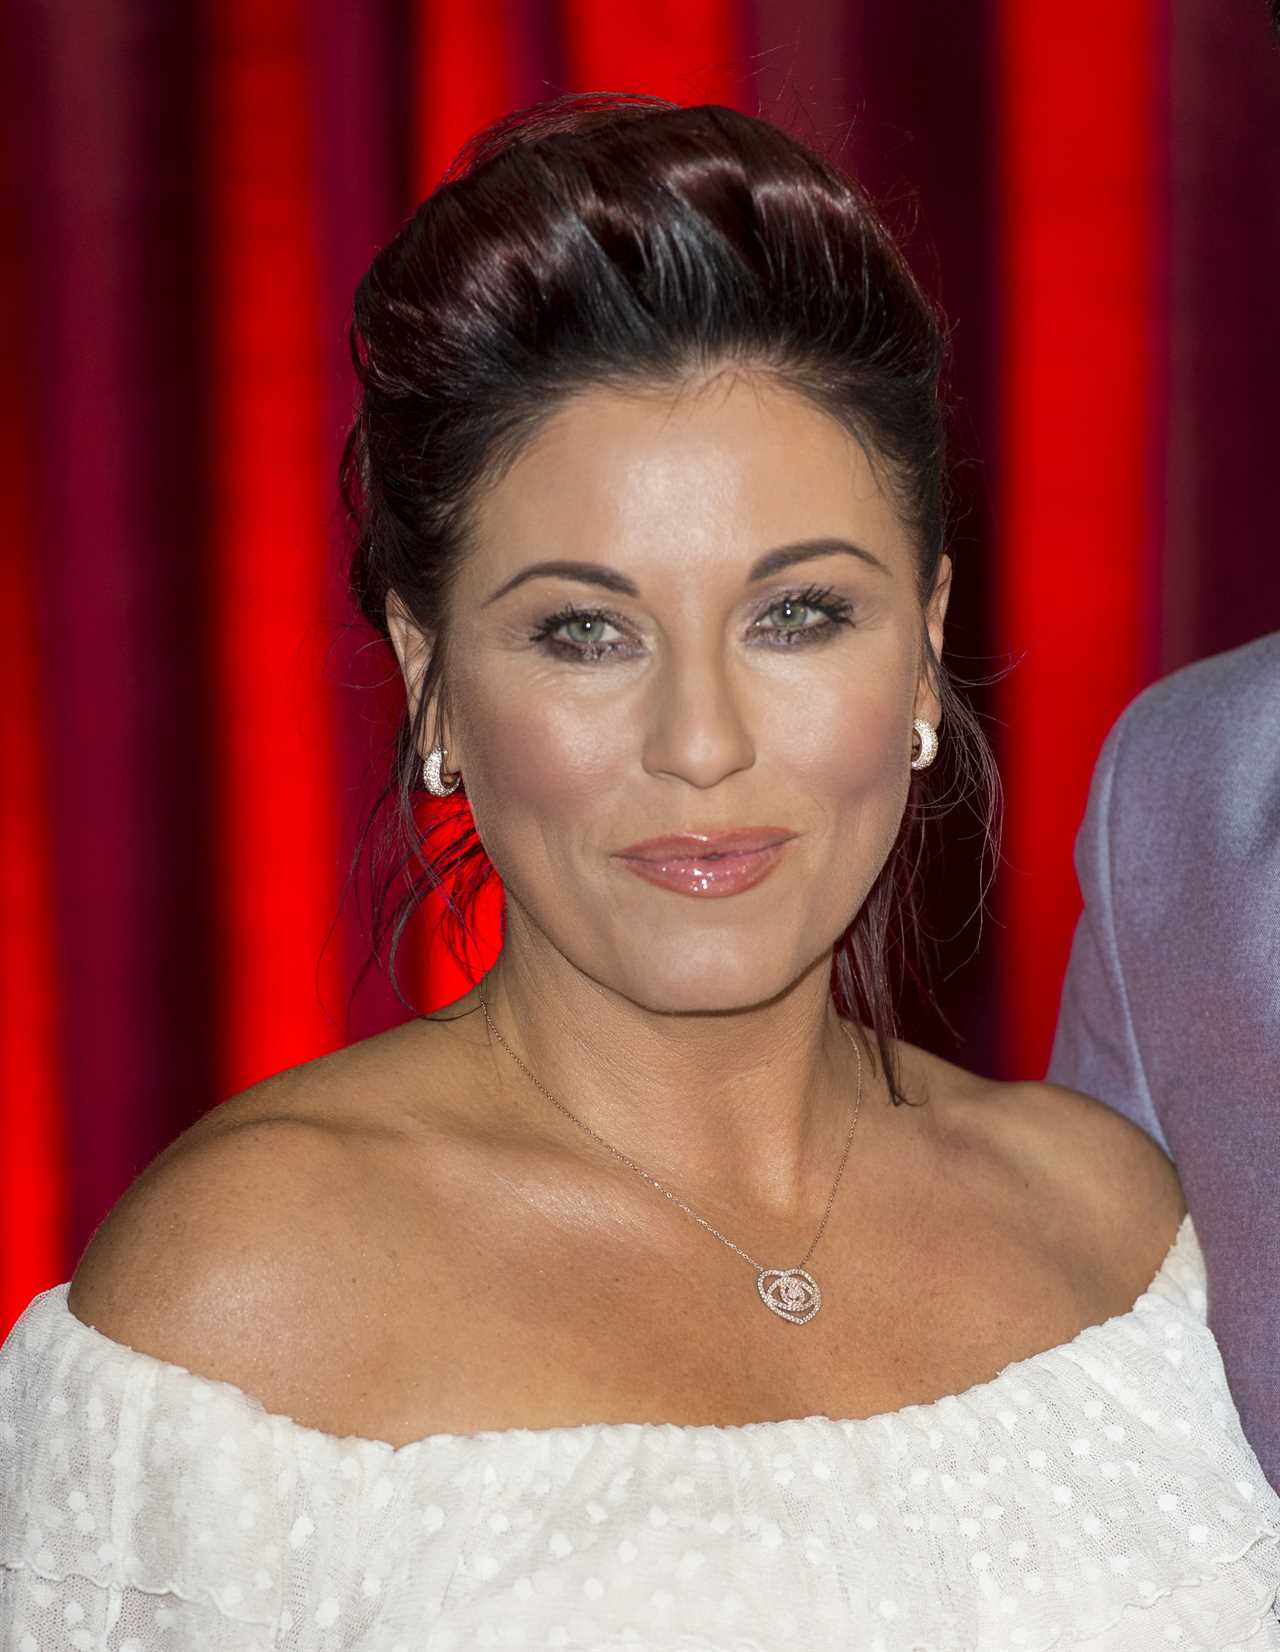 EastEnders Star Jessie Wallace Shocks Fans with Bleach Blonde Makeover